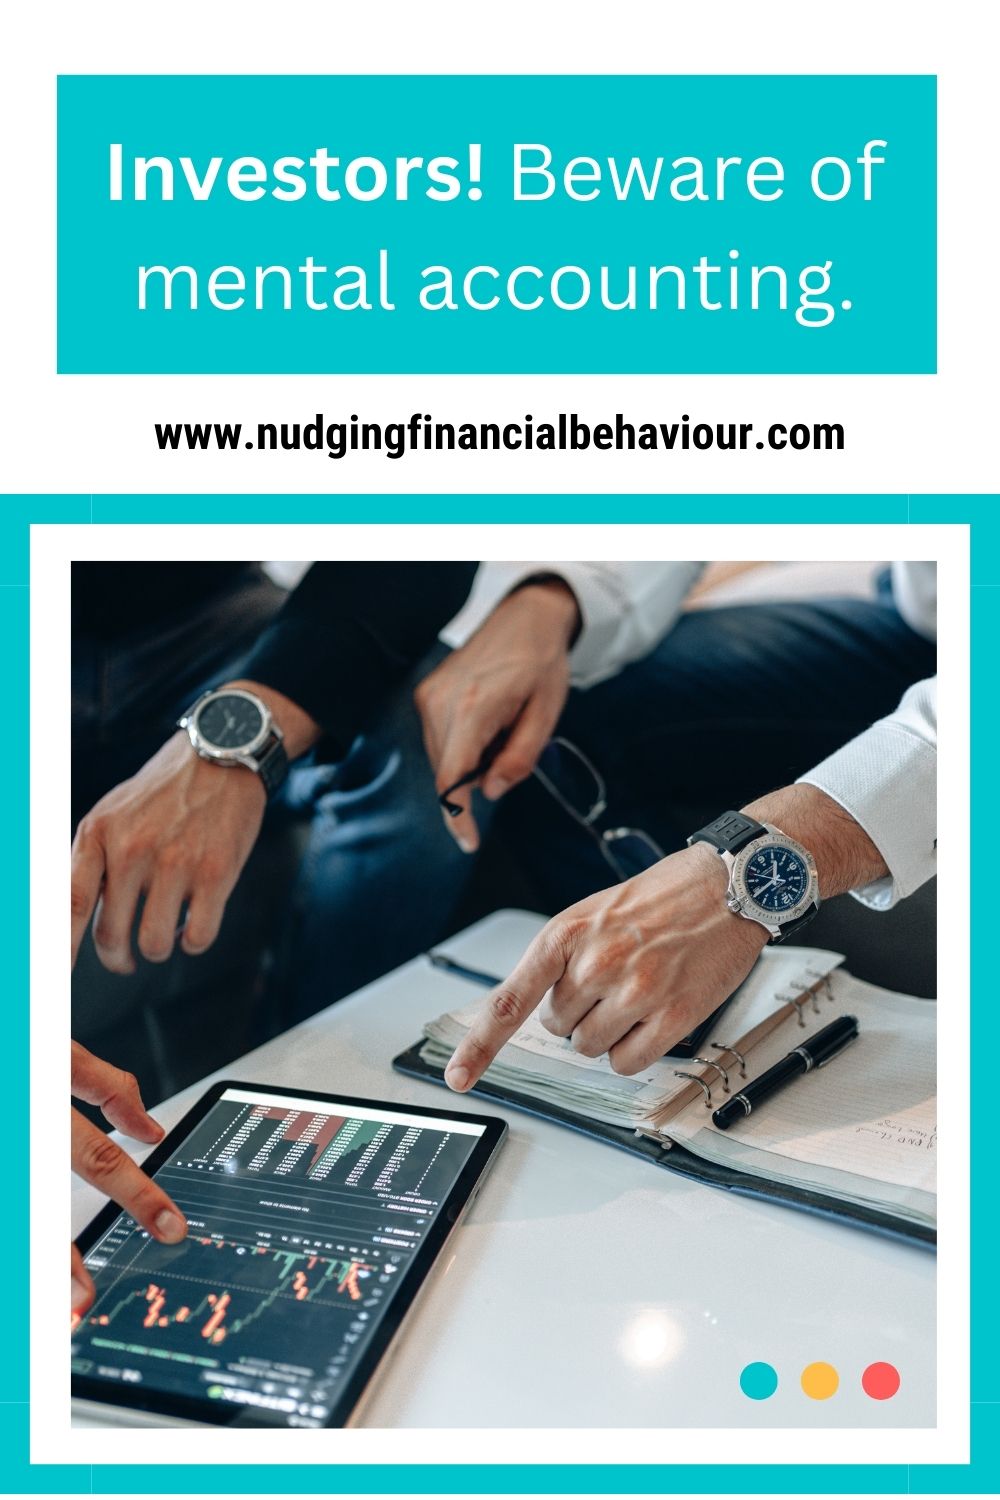 Mental accounting in investing